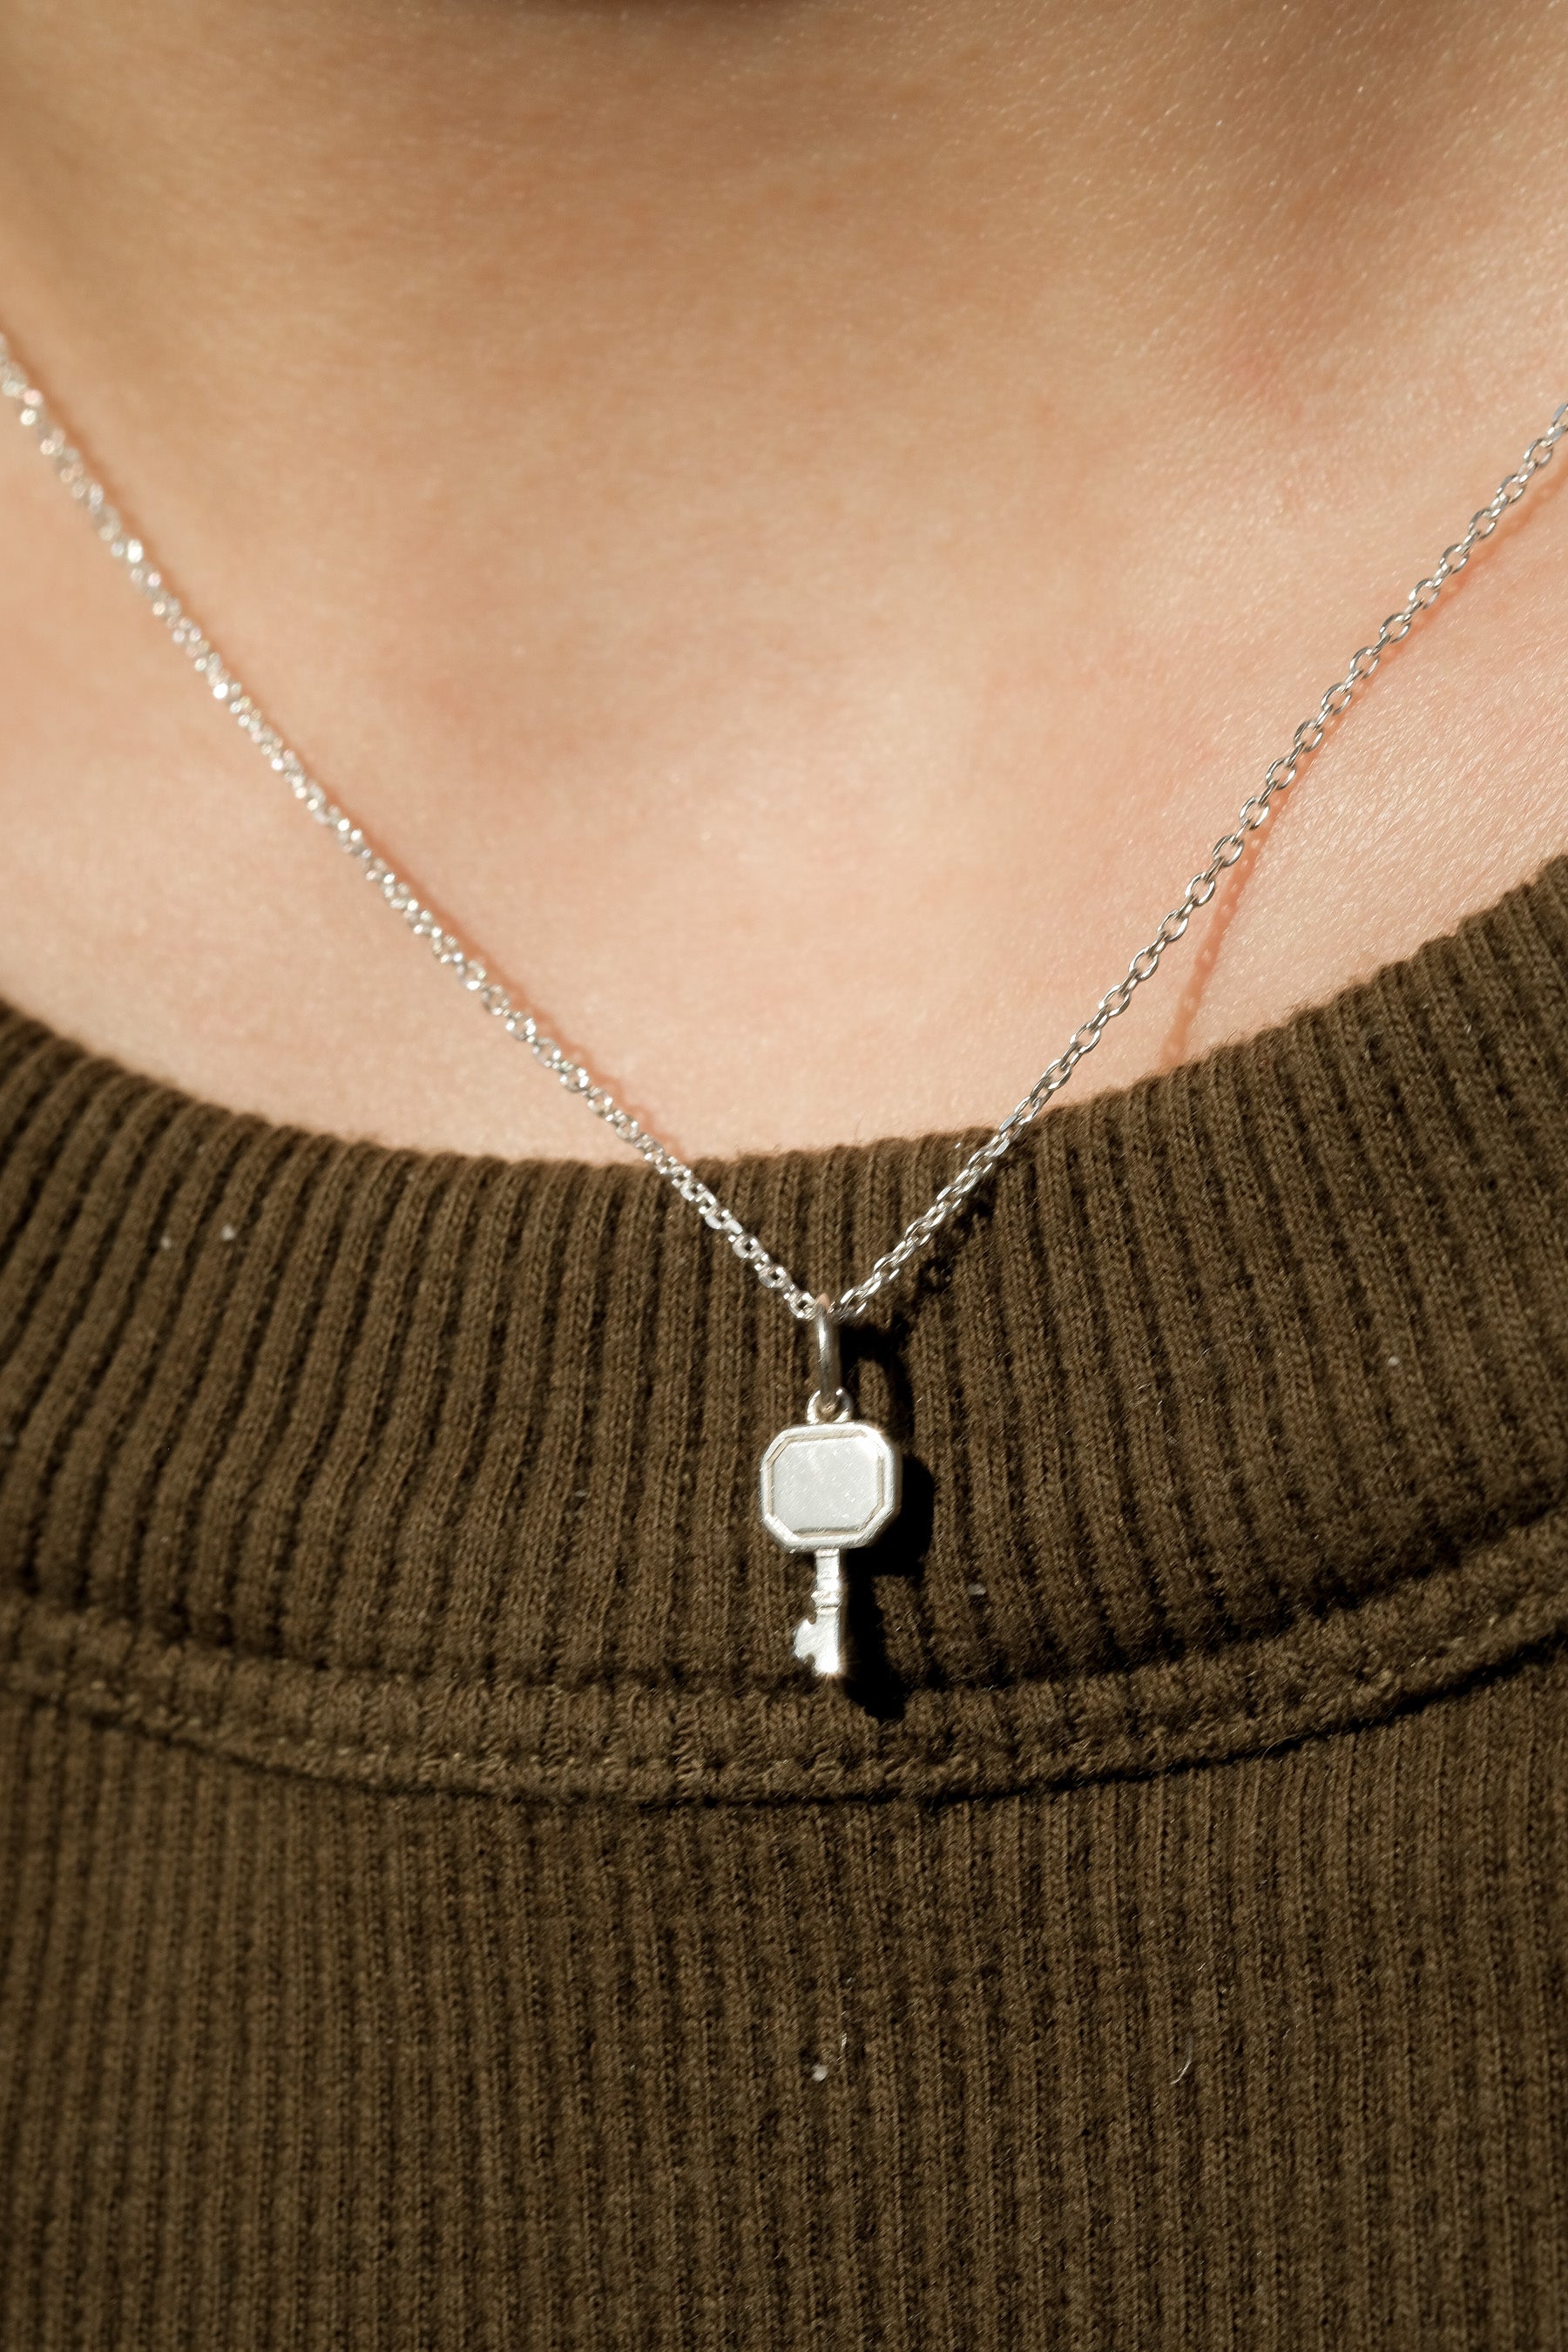 Anywhere Key Engravable Necklace - Sterling Silver